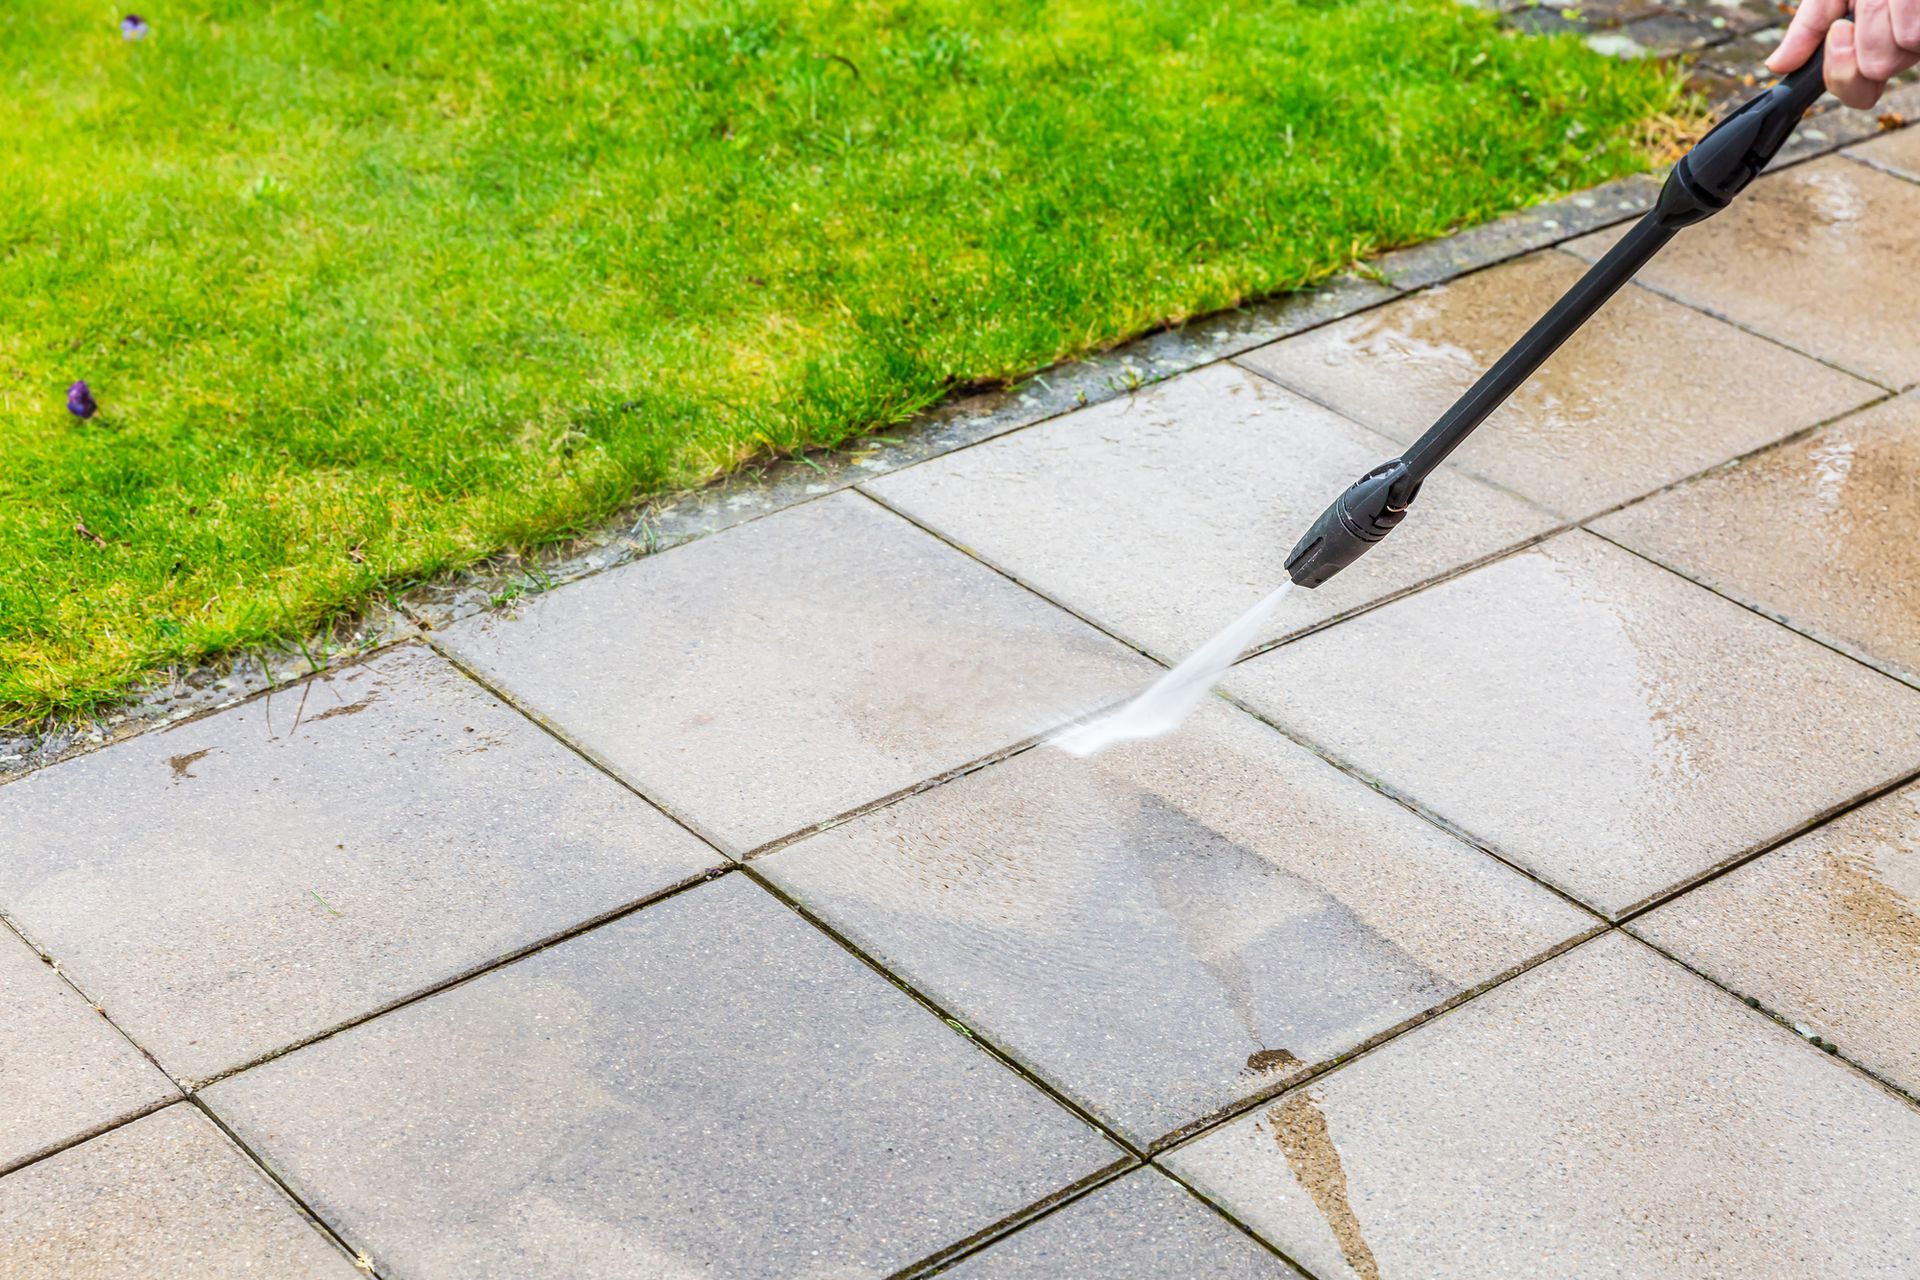 A person is using a high pressure washer to clean a patio.